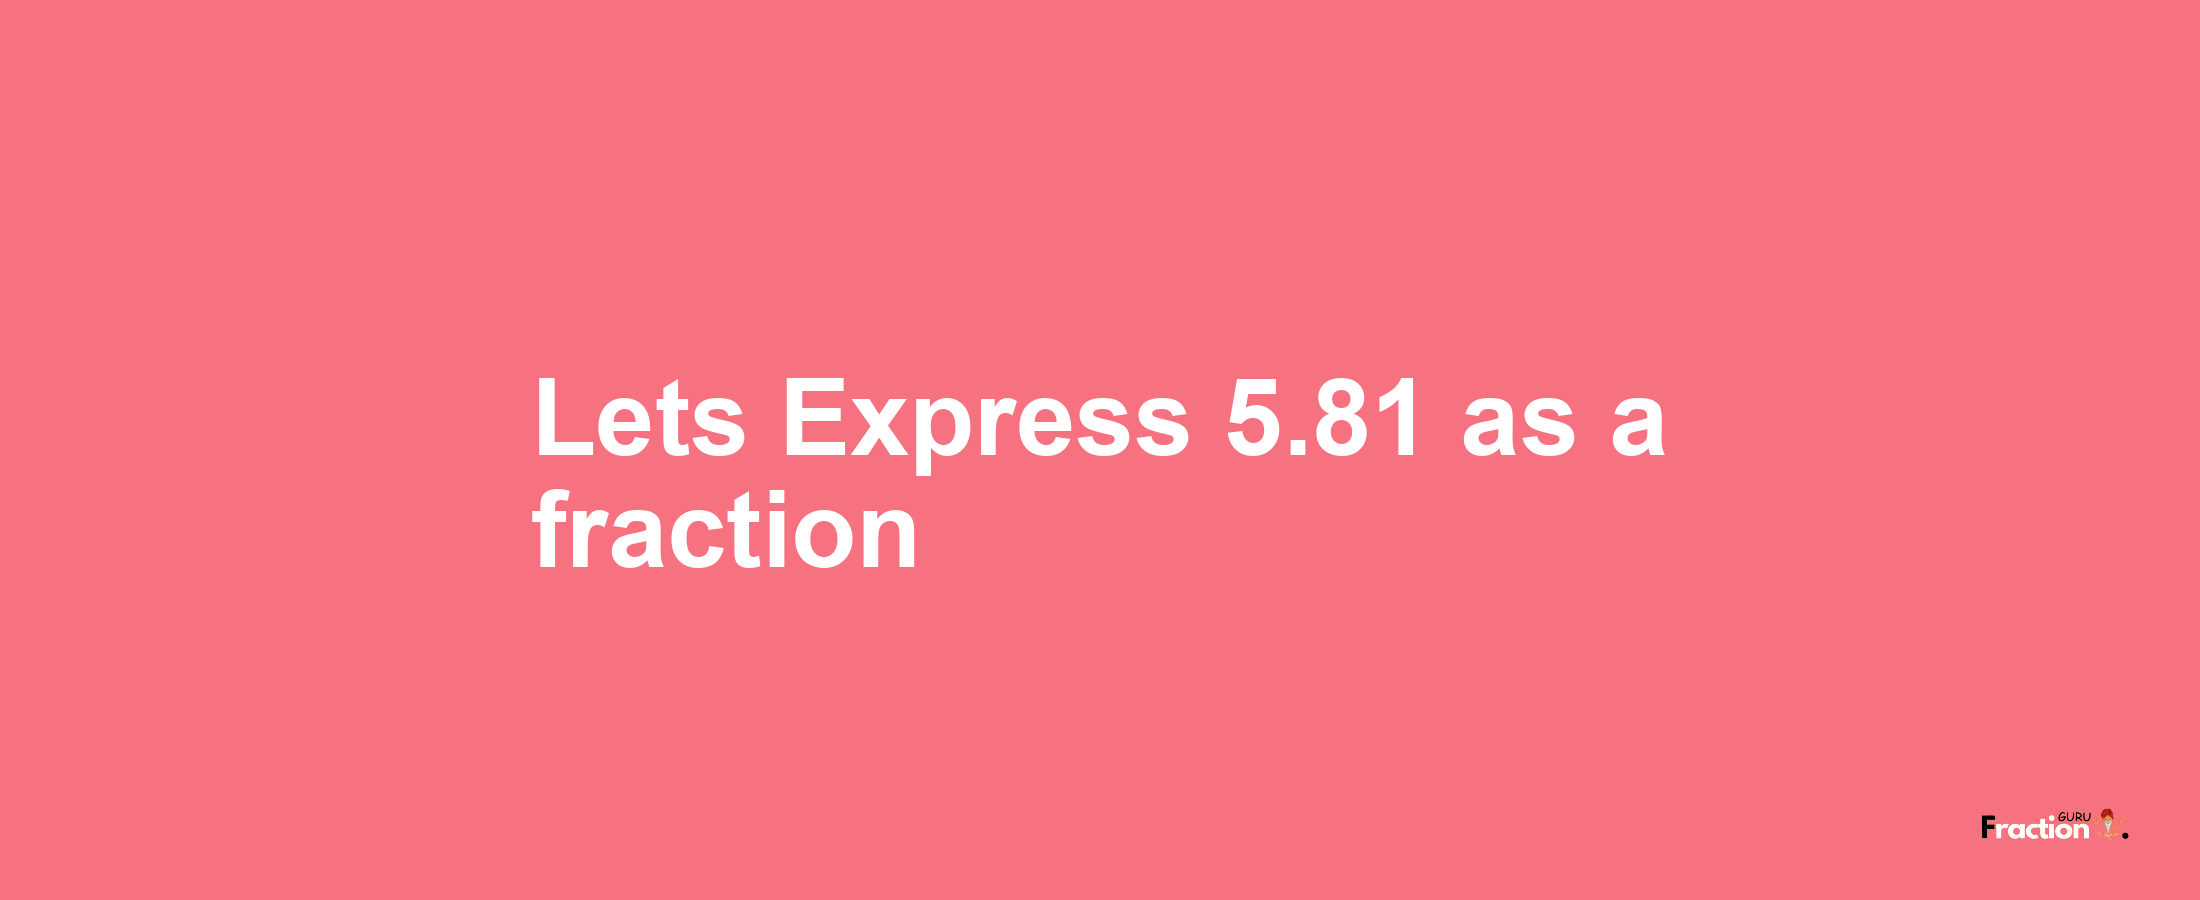 Lets Express 5.81 as afraction